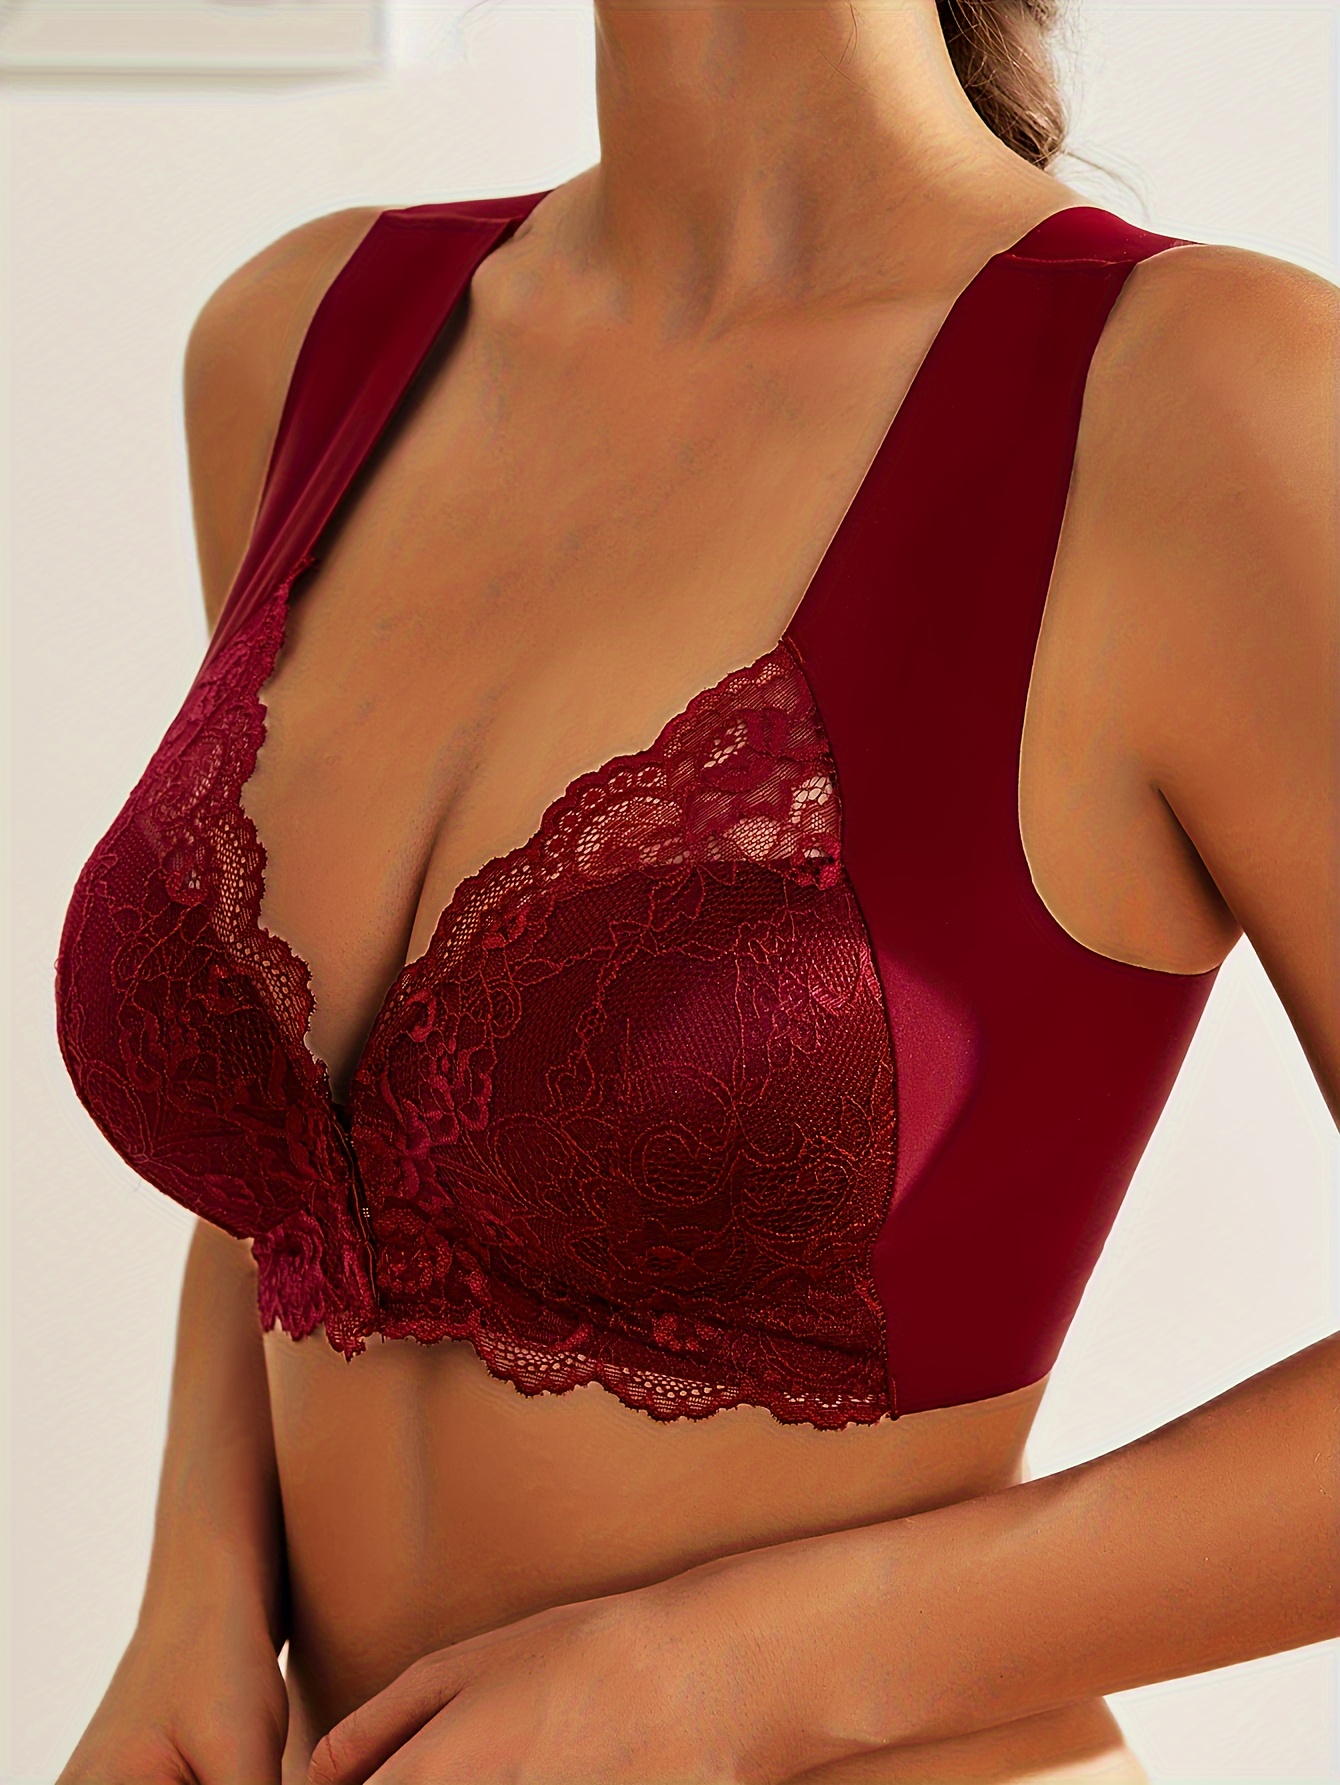 Dropship Super Soft & Comfortable Front Close Bra, Elegant Lace Wireless  Push Up Bra, Mother's Day Gift, Women's Lingerie & Underwear to Sell Online  at a Lower Price